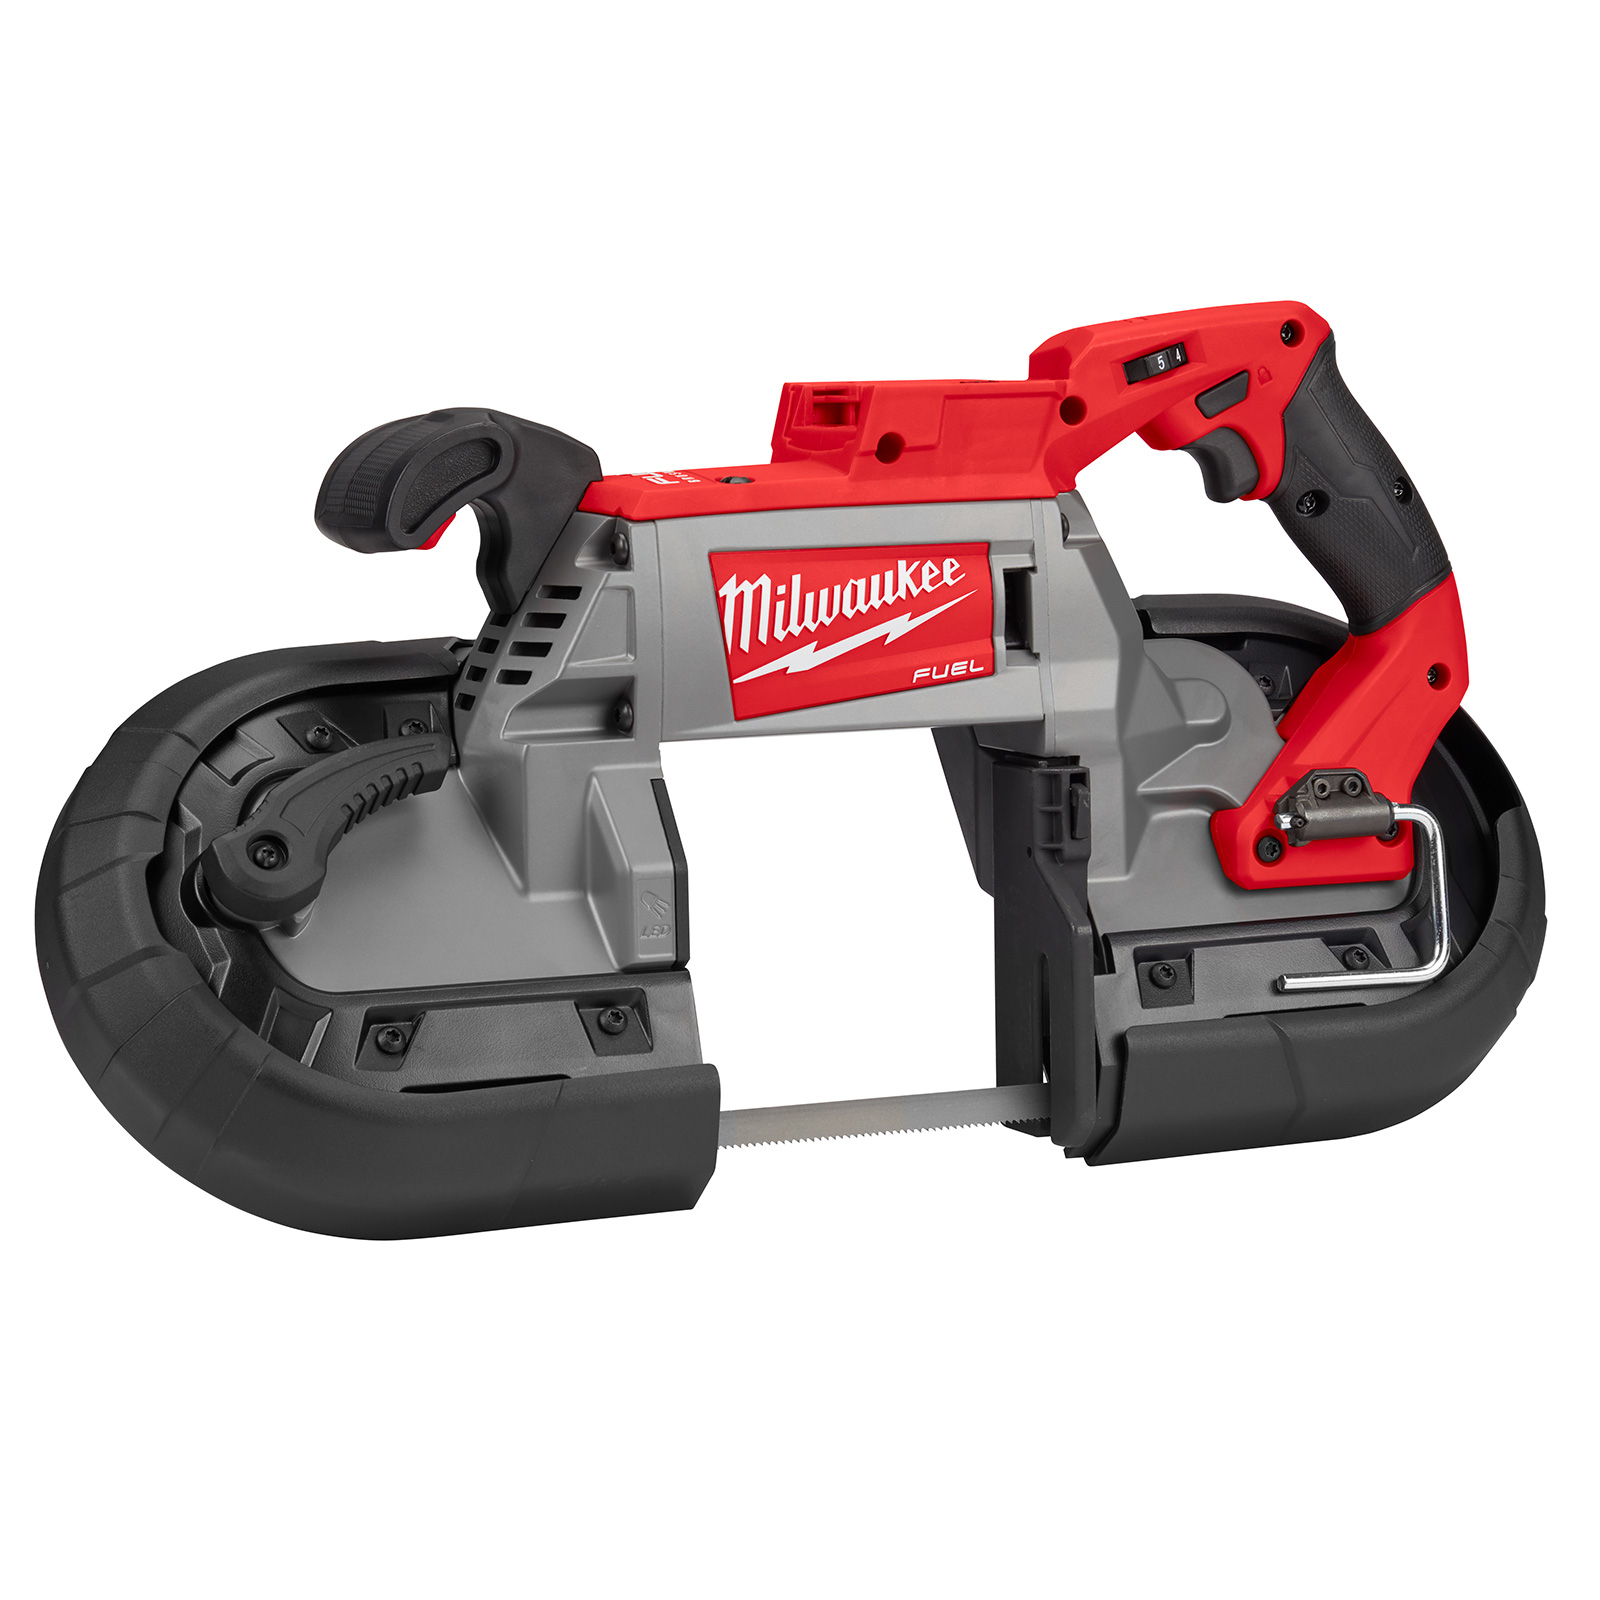 Milwaukee 18V Fuel Brushless Deep Cut Dual-Trigger Band Saw (tool only) M18CBS125S-0